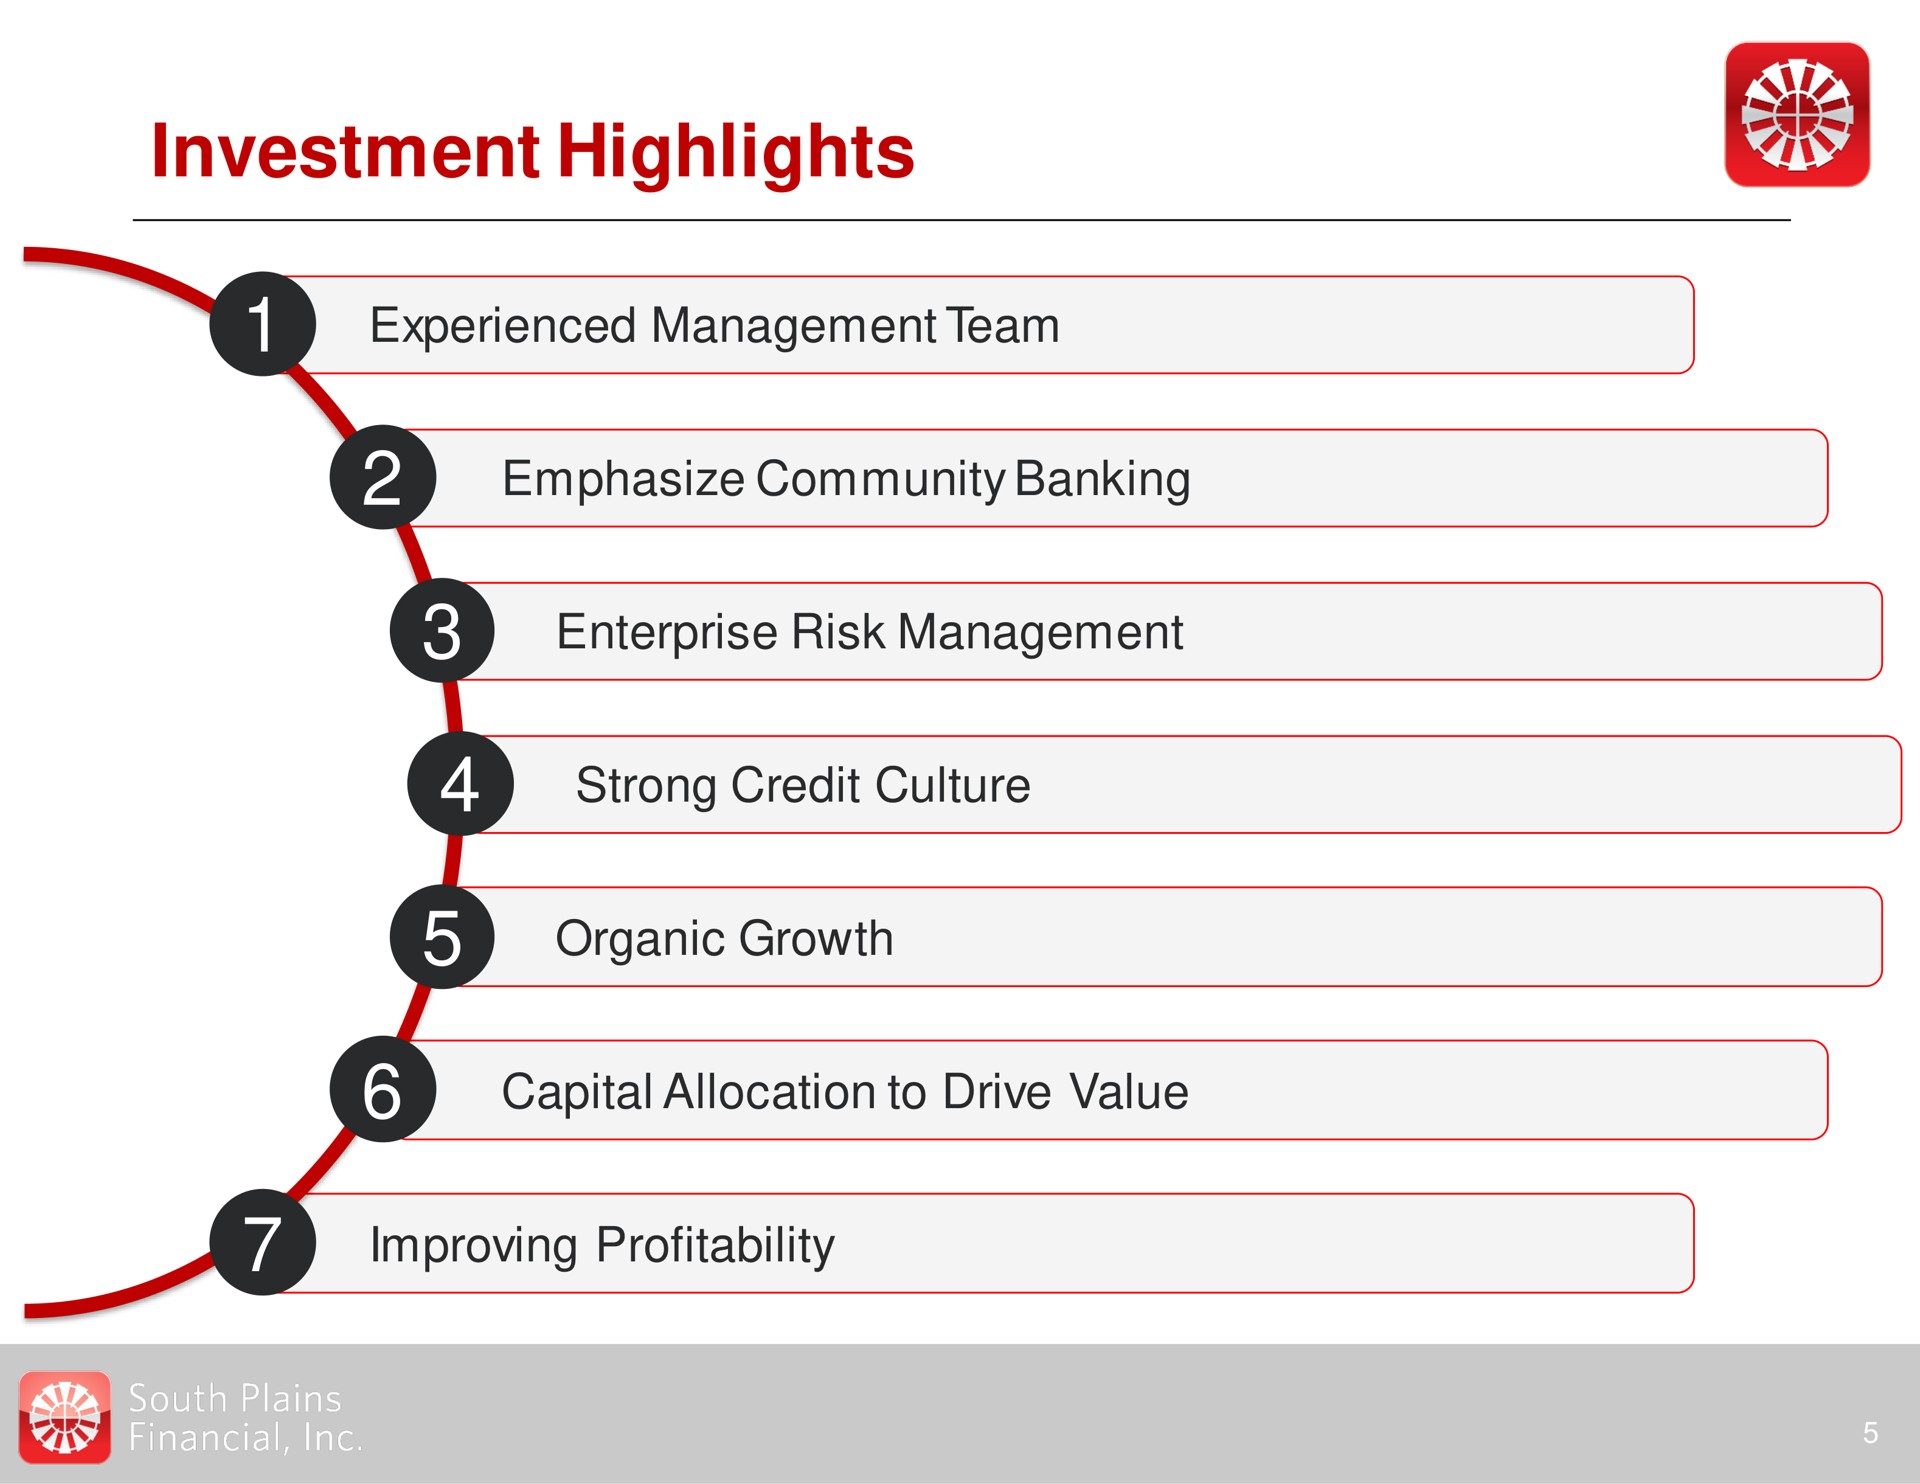 investment highlights experienced management team emphasize community banking enterprise risk management strong credit culture organic growth capital allocation to drive value improving profitability by a | South Plains Financial